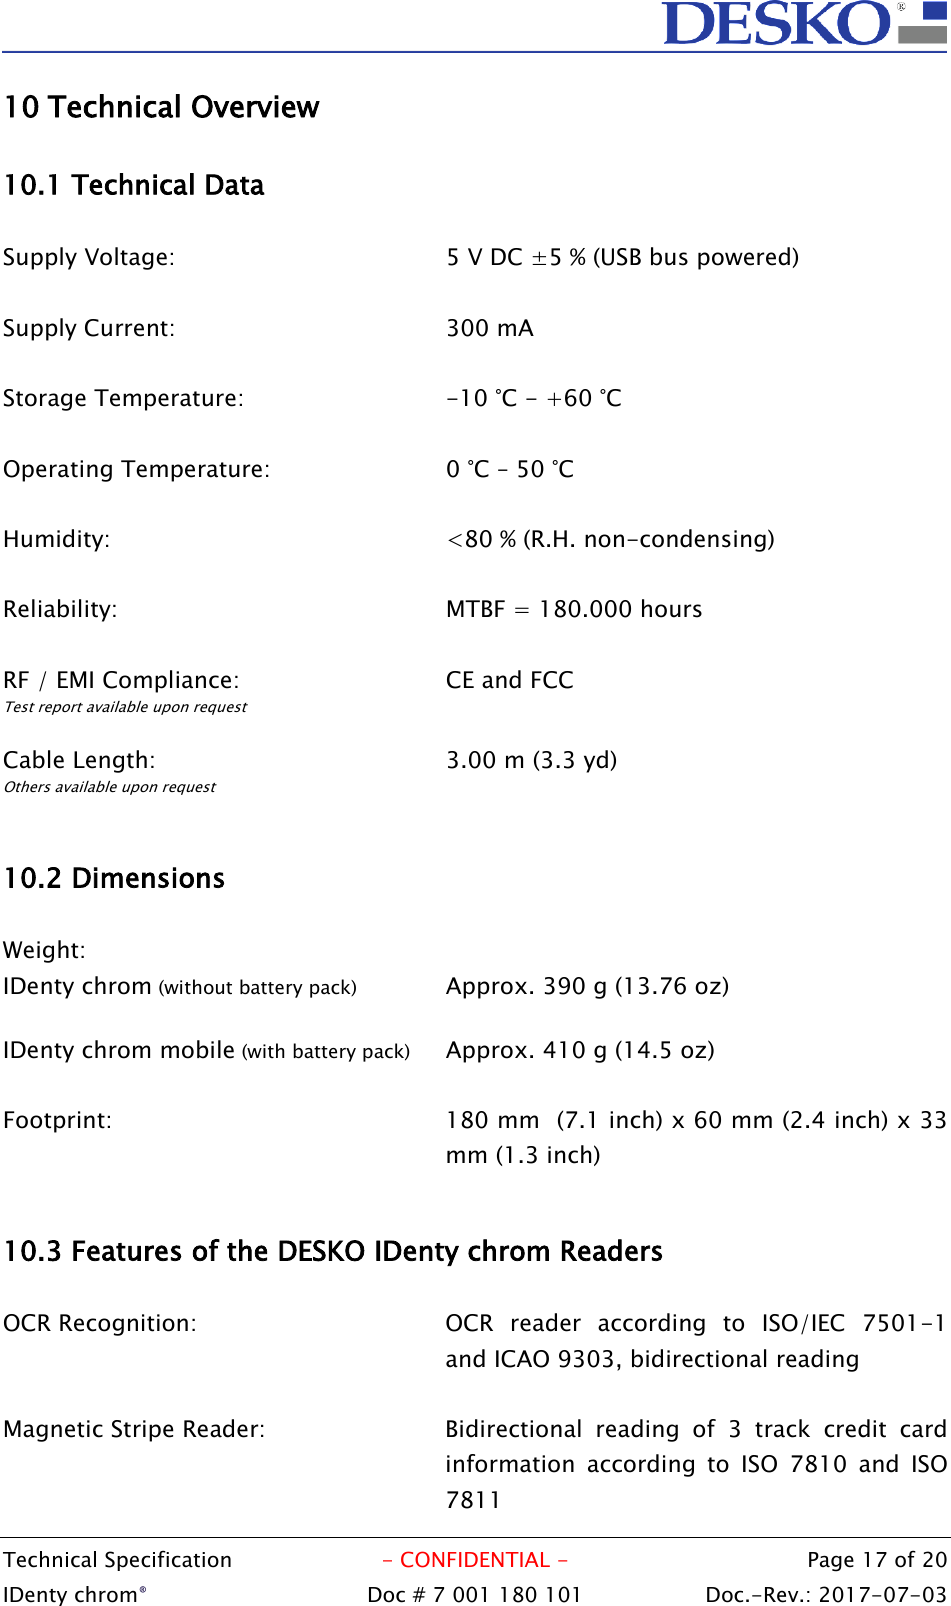  Technical Specification  - CONFIDENTIAL -  Page 17 of 20 IDenty chrom®  Doc # 7 001 180 101   Doc.-Rev.: 2017-07-03   10 Technical Overview  10.1 Technical Data  Supply Voltage:        5 V DC ±5 % (USB bus powered)  Supply Current:        300 mA  Storage Temperature:      -10 °C - +60 °C  Operating Temperature:      0 °C – 50 °C  Humidity:          &lt;80 % (R.H. non-condensing)  Reliability:          MTBF = 180.000 hours  RF / EMI Compliance:      CE and FCC Test report available upon request  Cable Length:        3.00 m (3.3 yd) Others available upon request  10.2 Dimensions          Weight:           IDenty chrom (without battery pack)    Approx. 390 g (13.76 oz)  IDenty chrom mobile (with battery pack)   Approx. 410 g (14.5 oz)  Footprint:   180 mm  (7.1 inch) x 60 mm (2.4 inch) x 33 mm (1.3 inch)  10.3 Features of the DESKO IDenty chrom Readers  OCR Recognition:  OCR  reader  according  to  ISO/IEC  7501-1 and ICAO 9303, bidirectional reading  Magnetic Stripe Reader:  Bidirectional  reading  of  3  track  credit  card information  according  to  ISO  7810  and  ISO 7811 